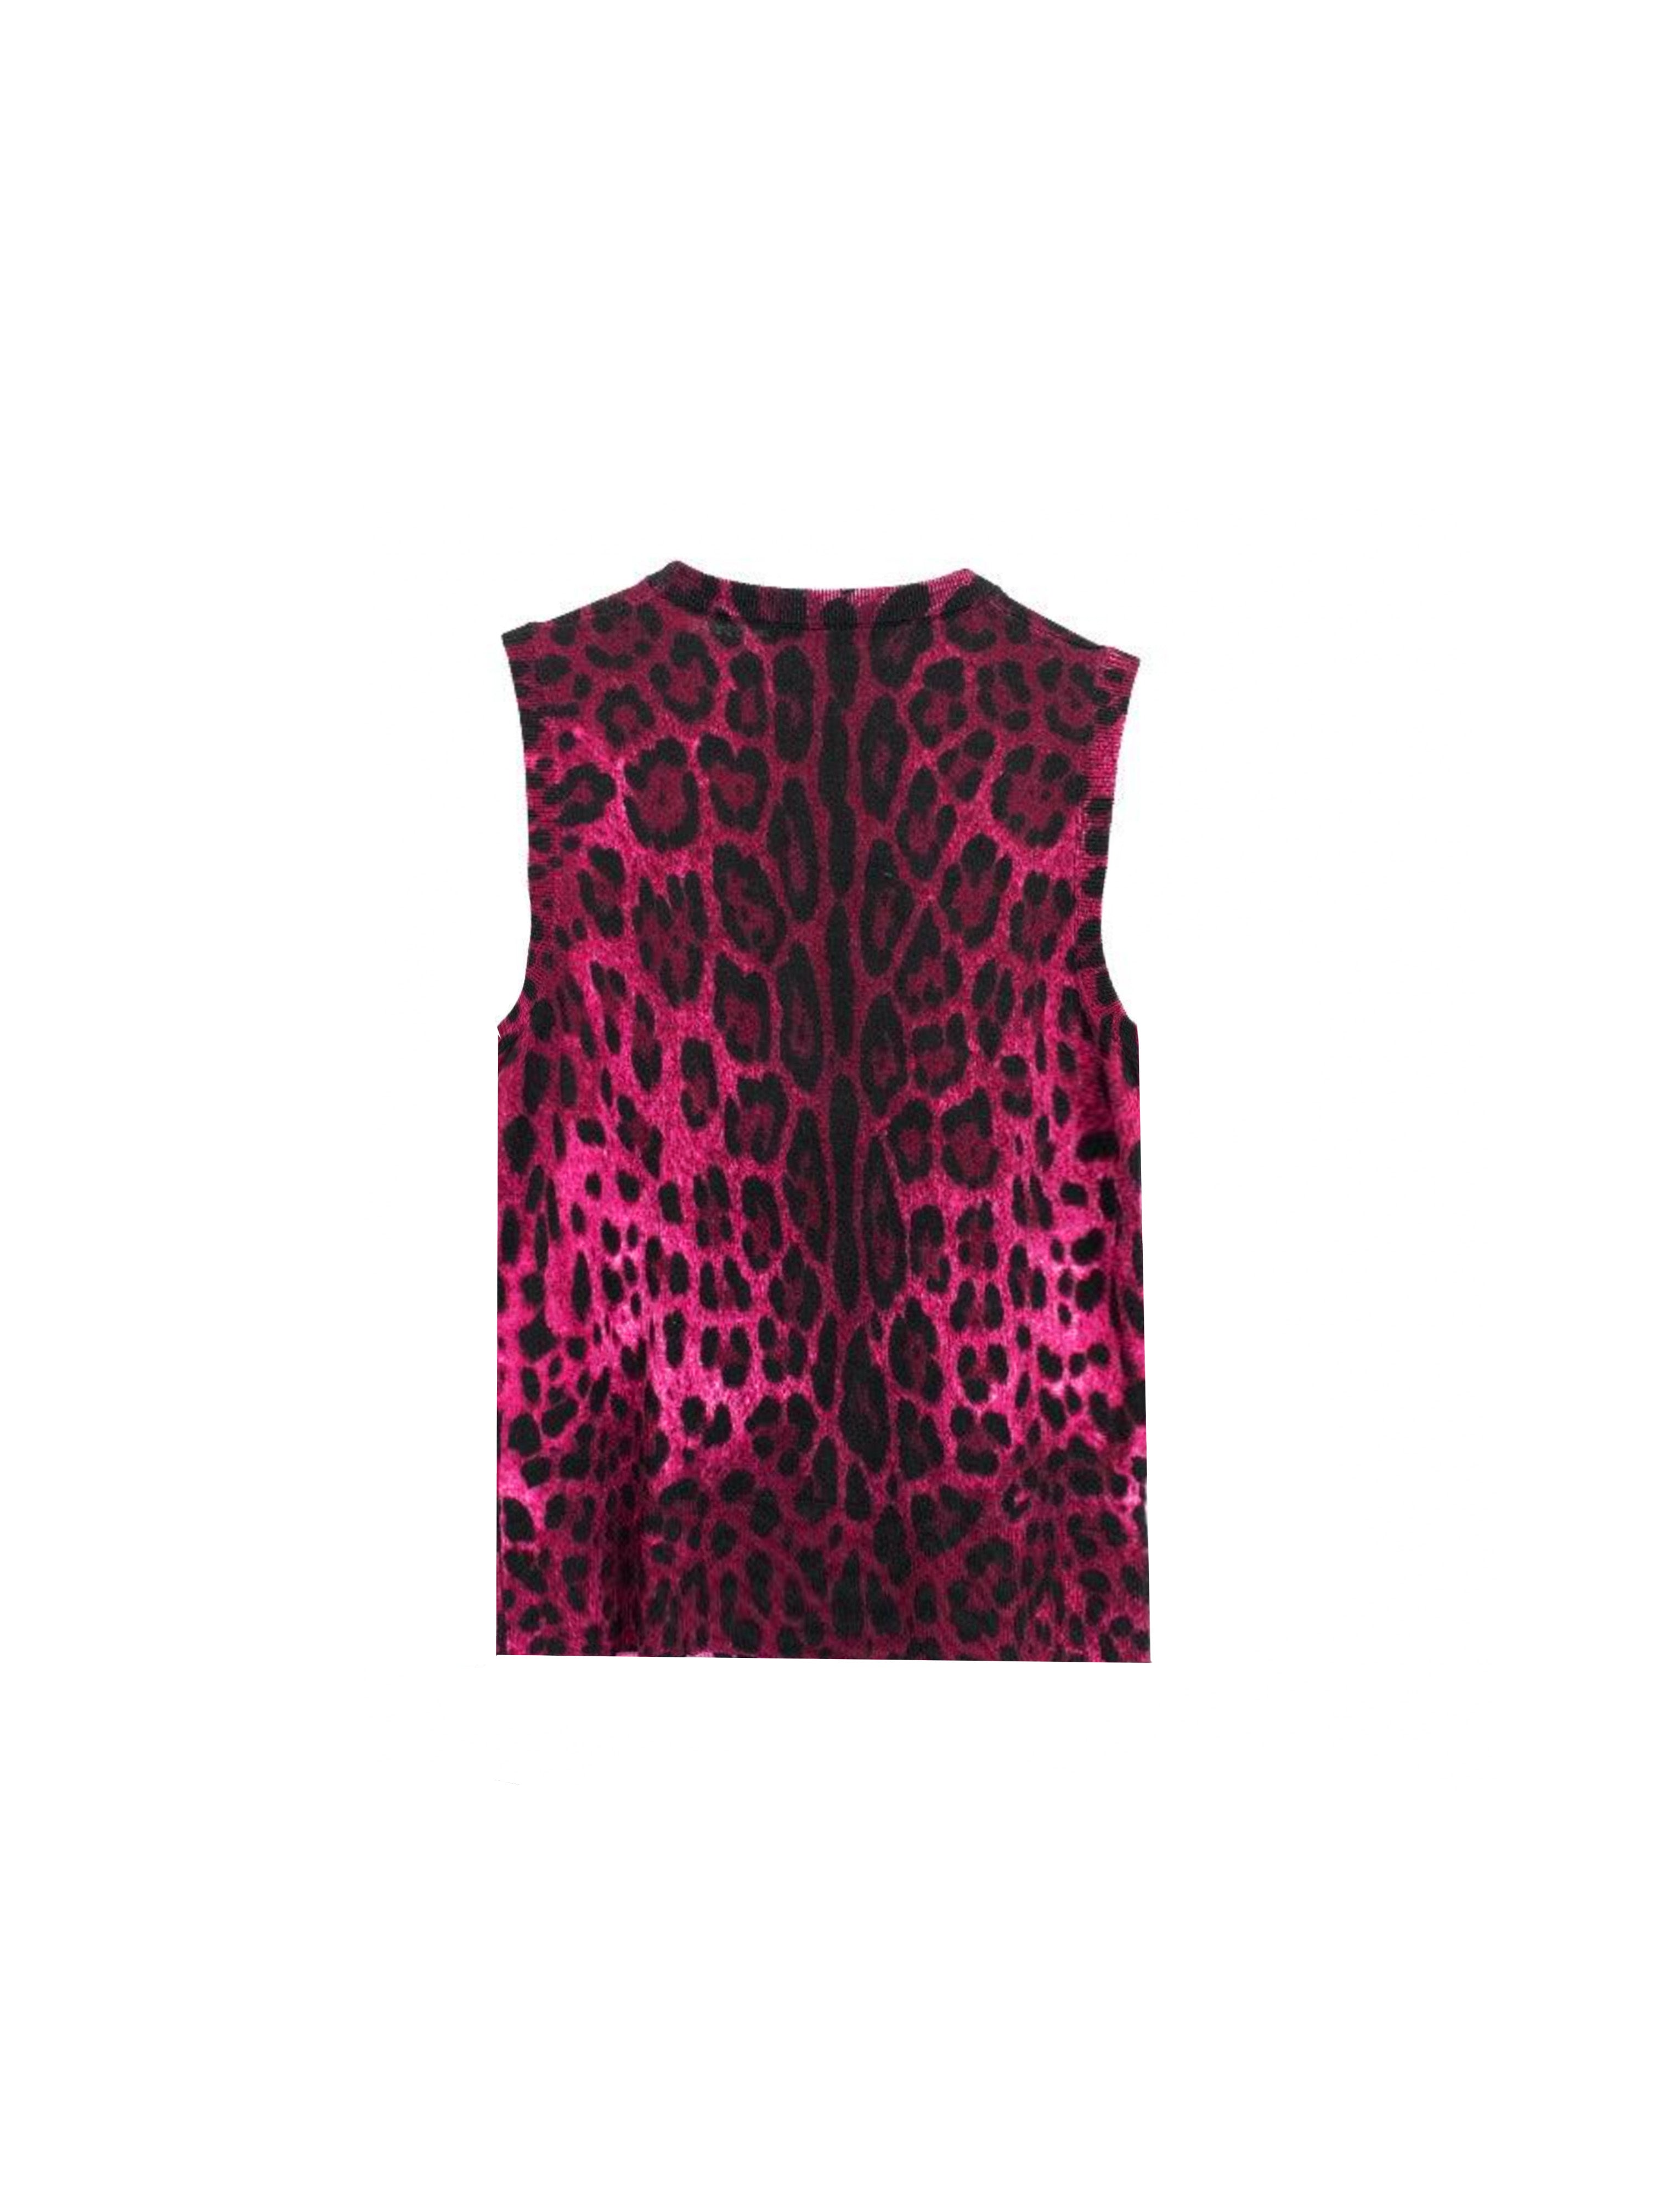 Dolce and Gabbana 2000s Pink Leopard Knit Sweater